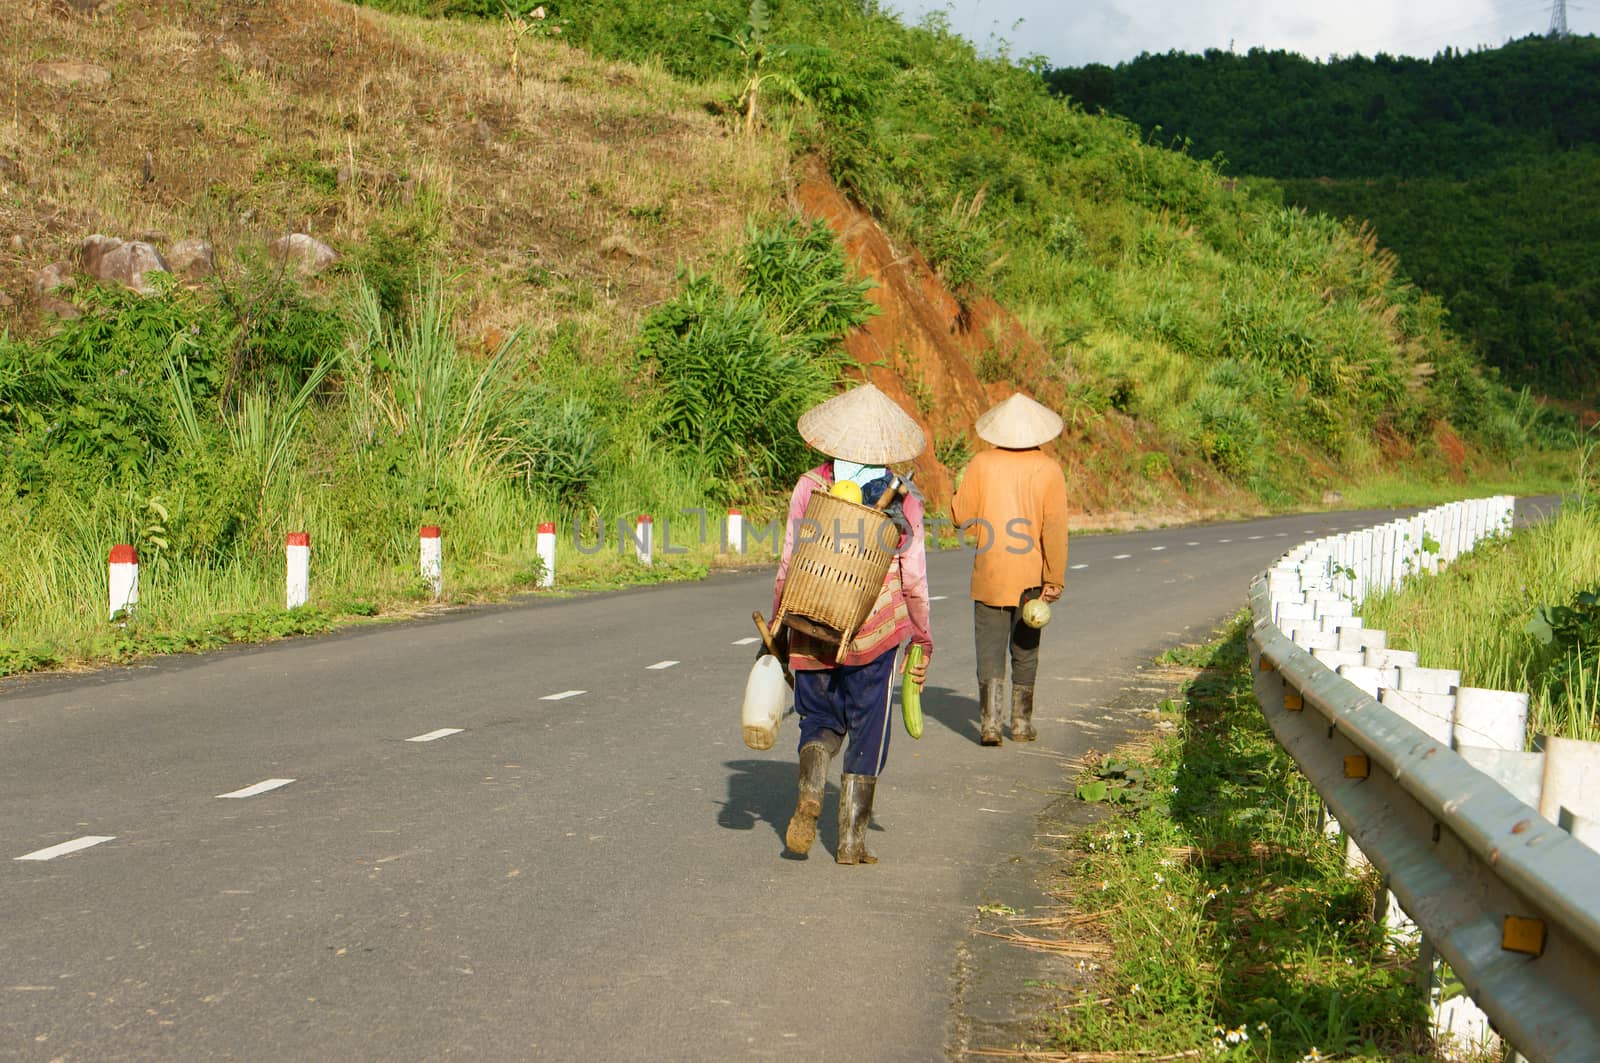  DAK LAK, VIET NAM- SEPTEMBER 4: People walking on countryside road to coming home after finish work in Viet Nam country side on September 4, 2012      